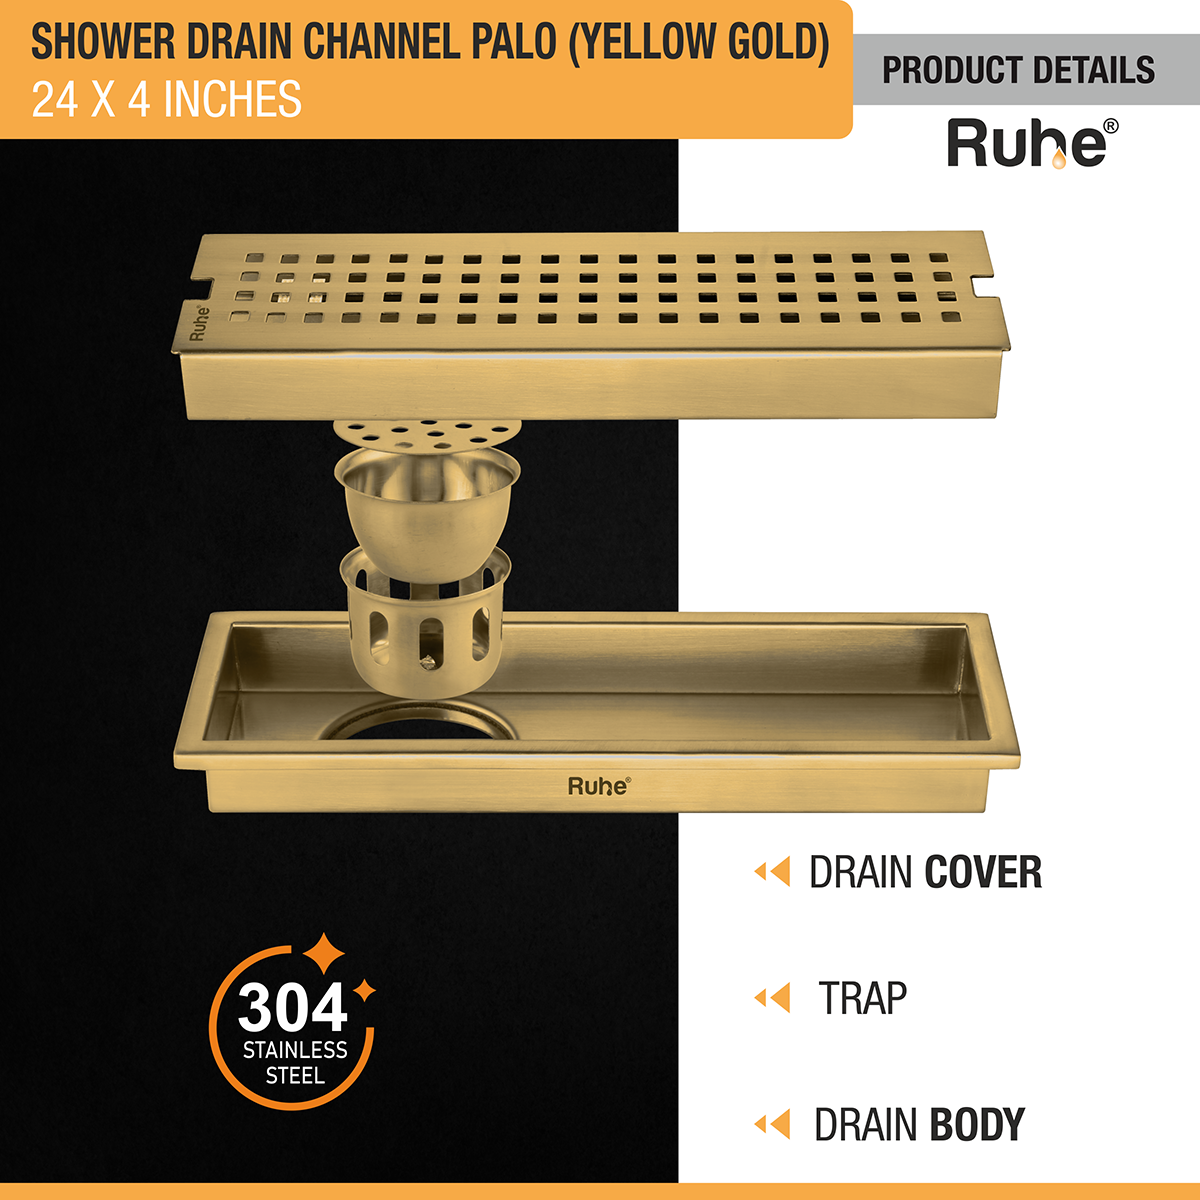 Palo Shower Drain Channel (24 x 4 Inches) YELLOW GOLD product details